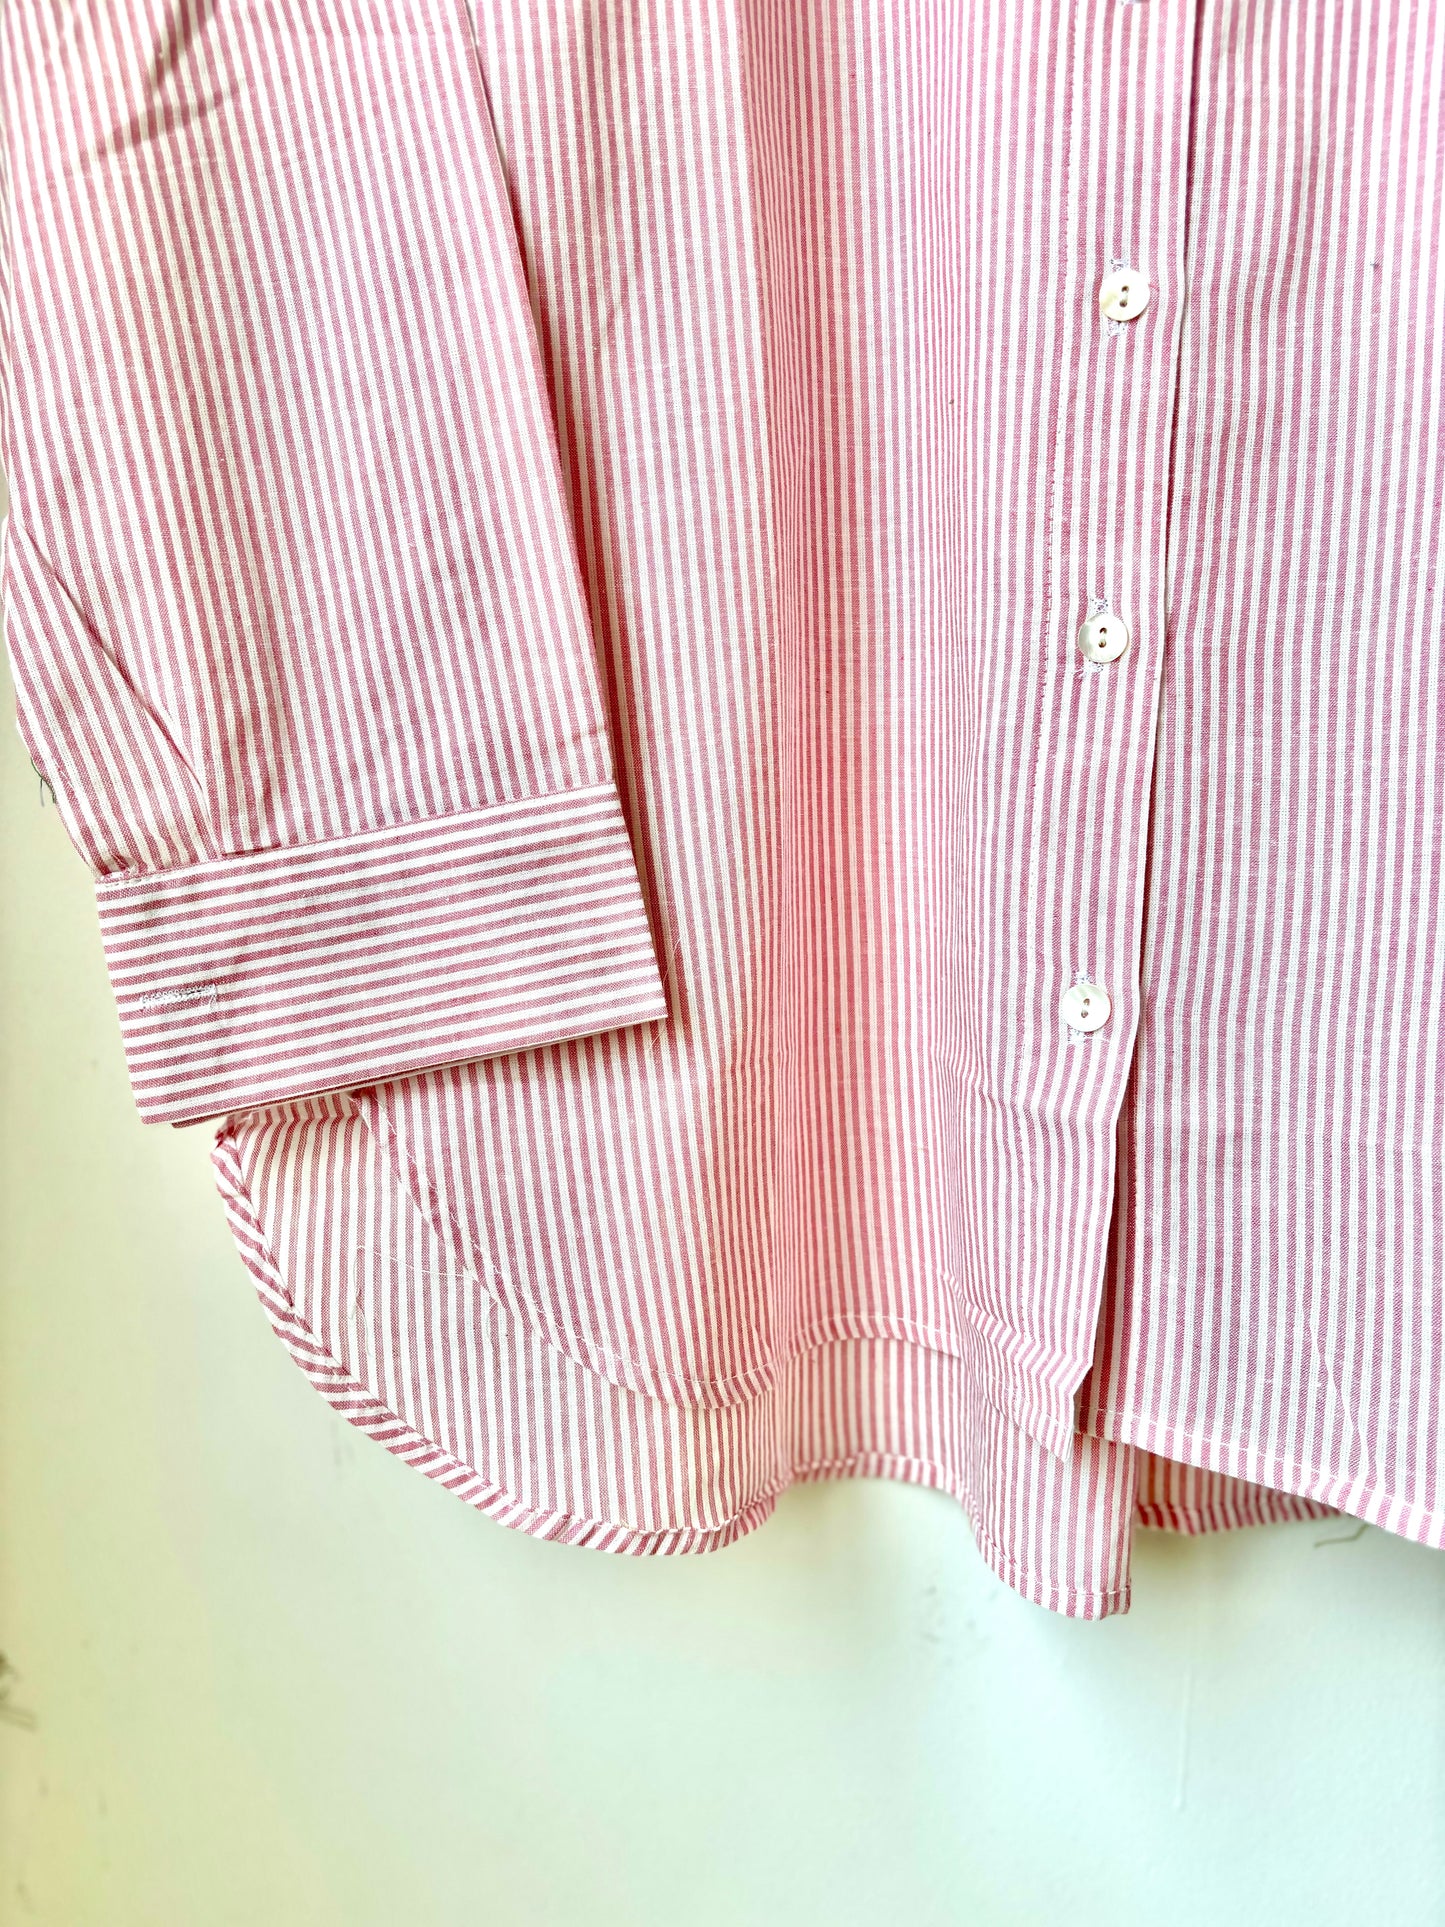 The Everyday Cotton Shirts